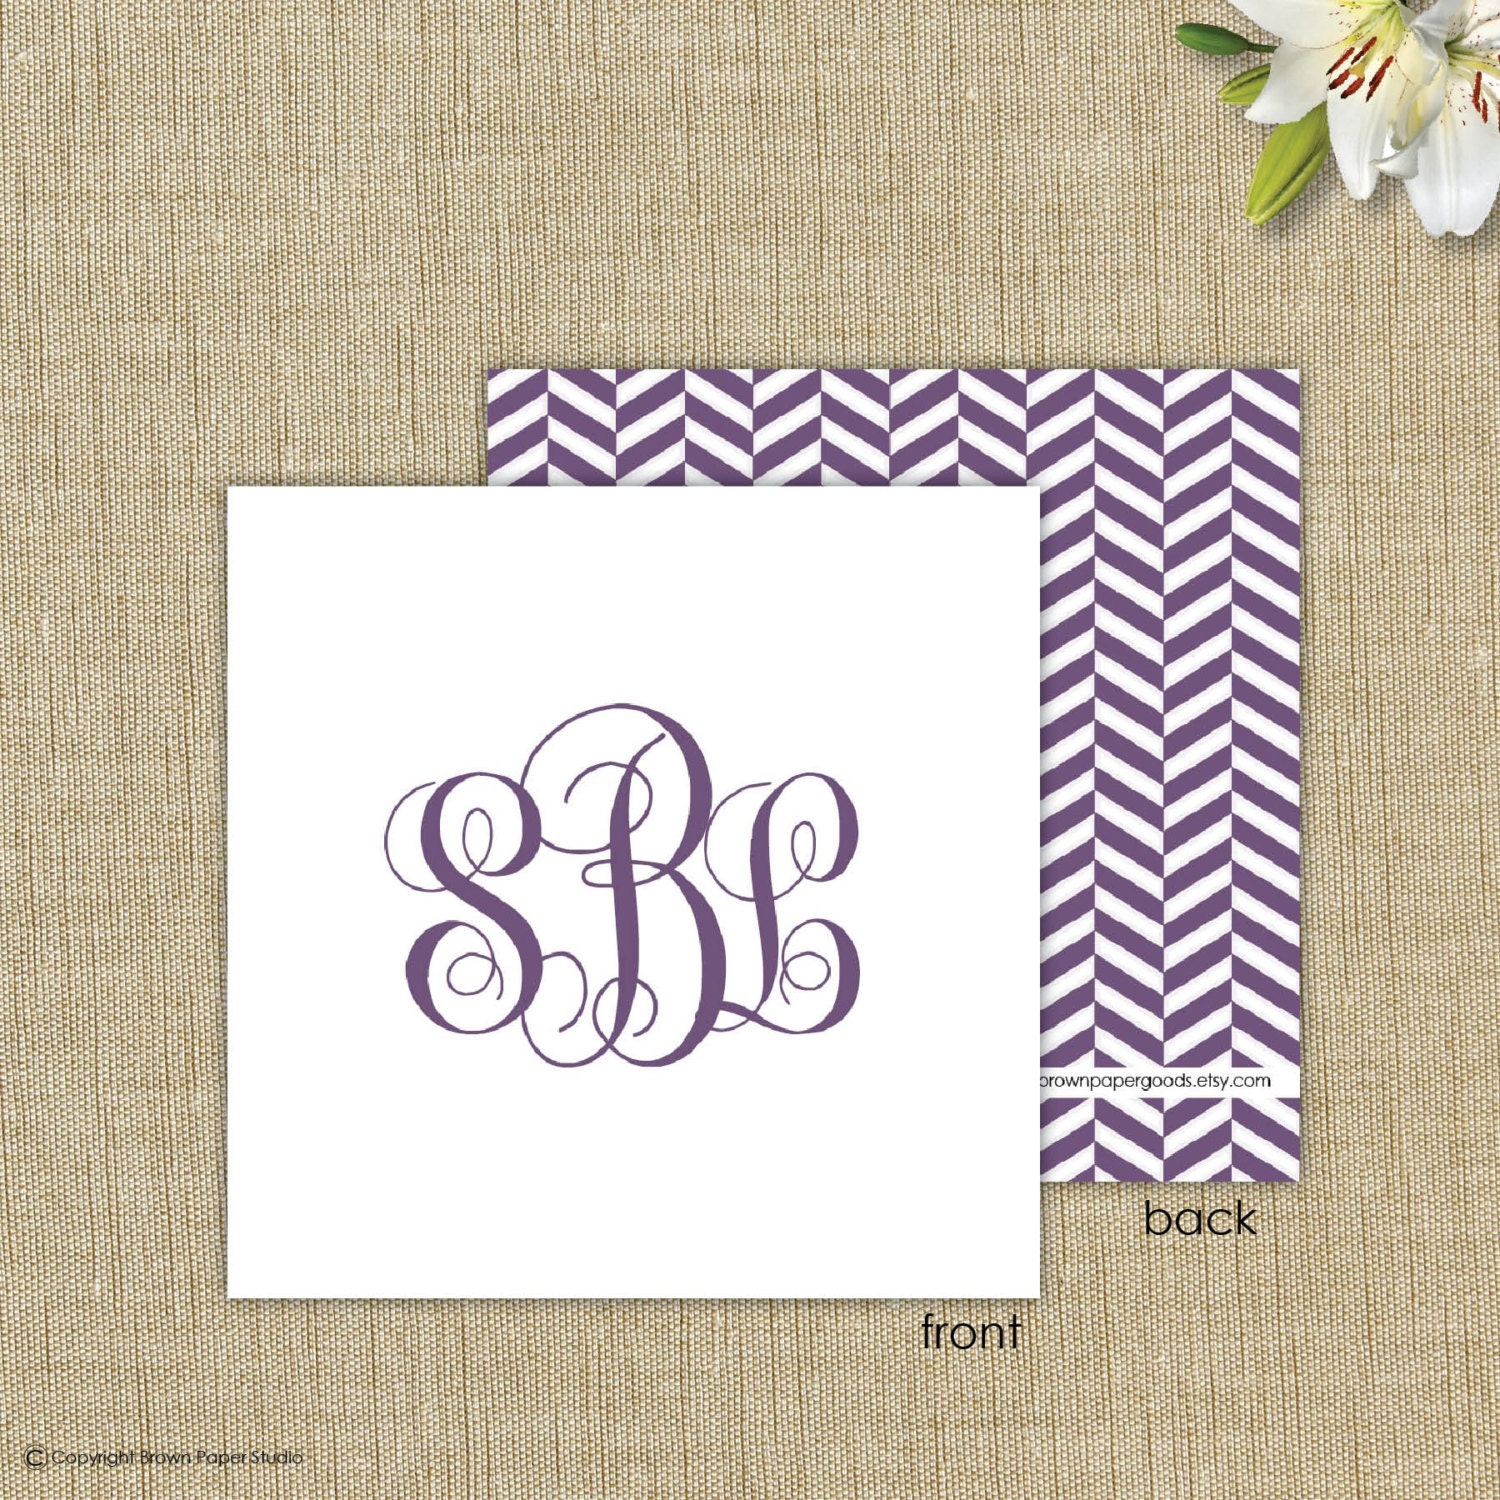 Personalized gift enclosure cards with envelopes. Monogram ...